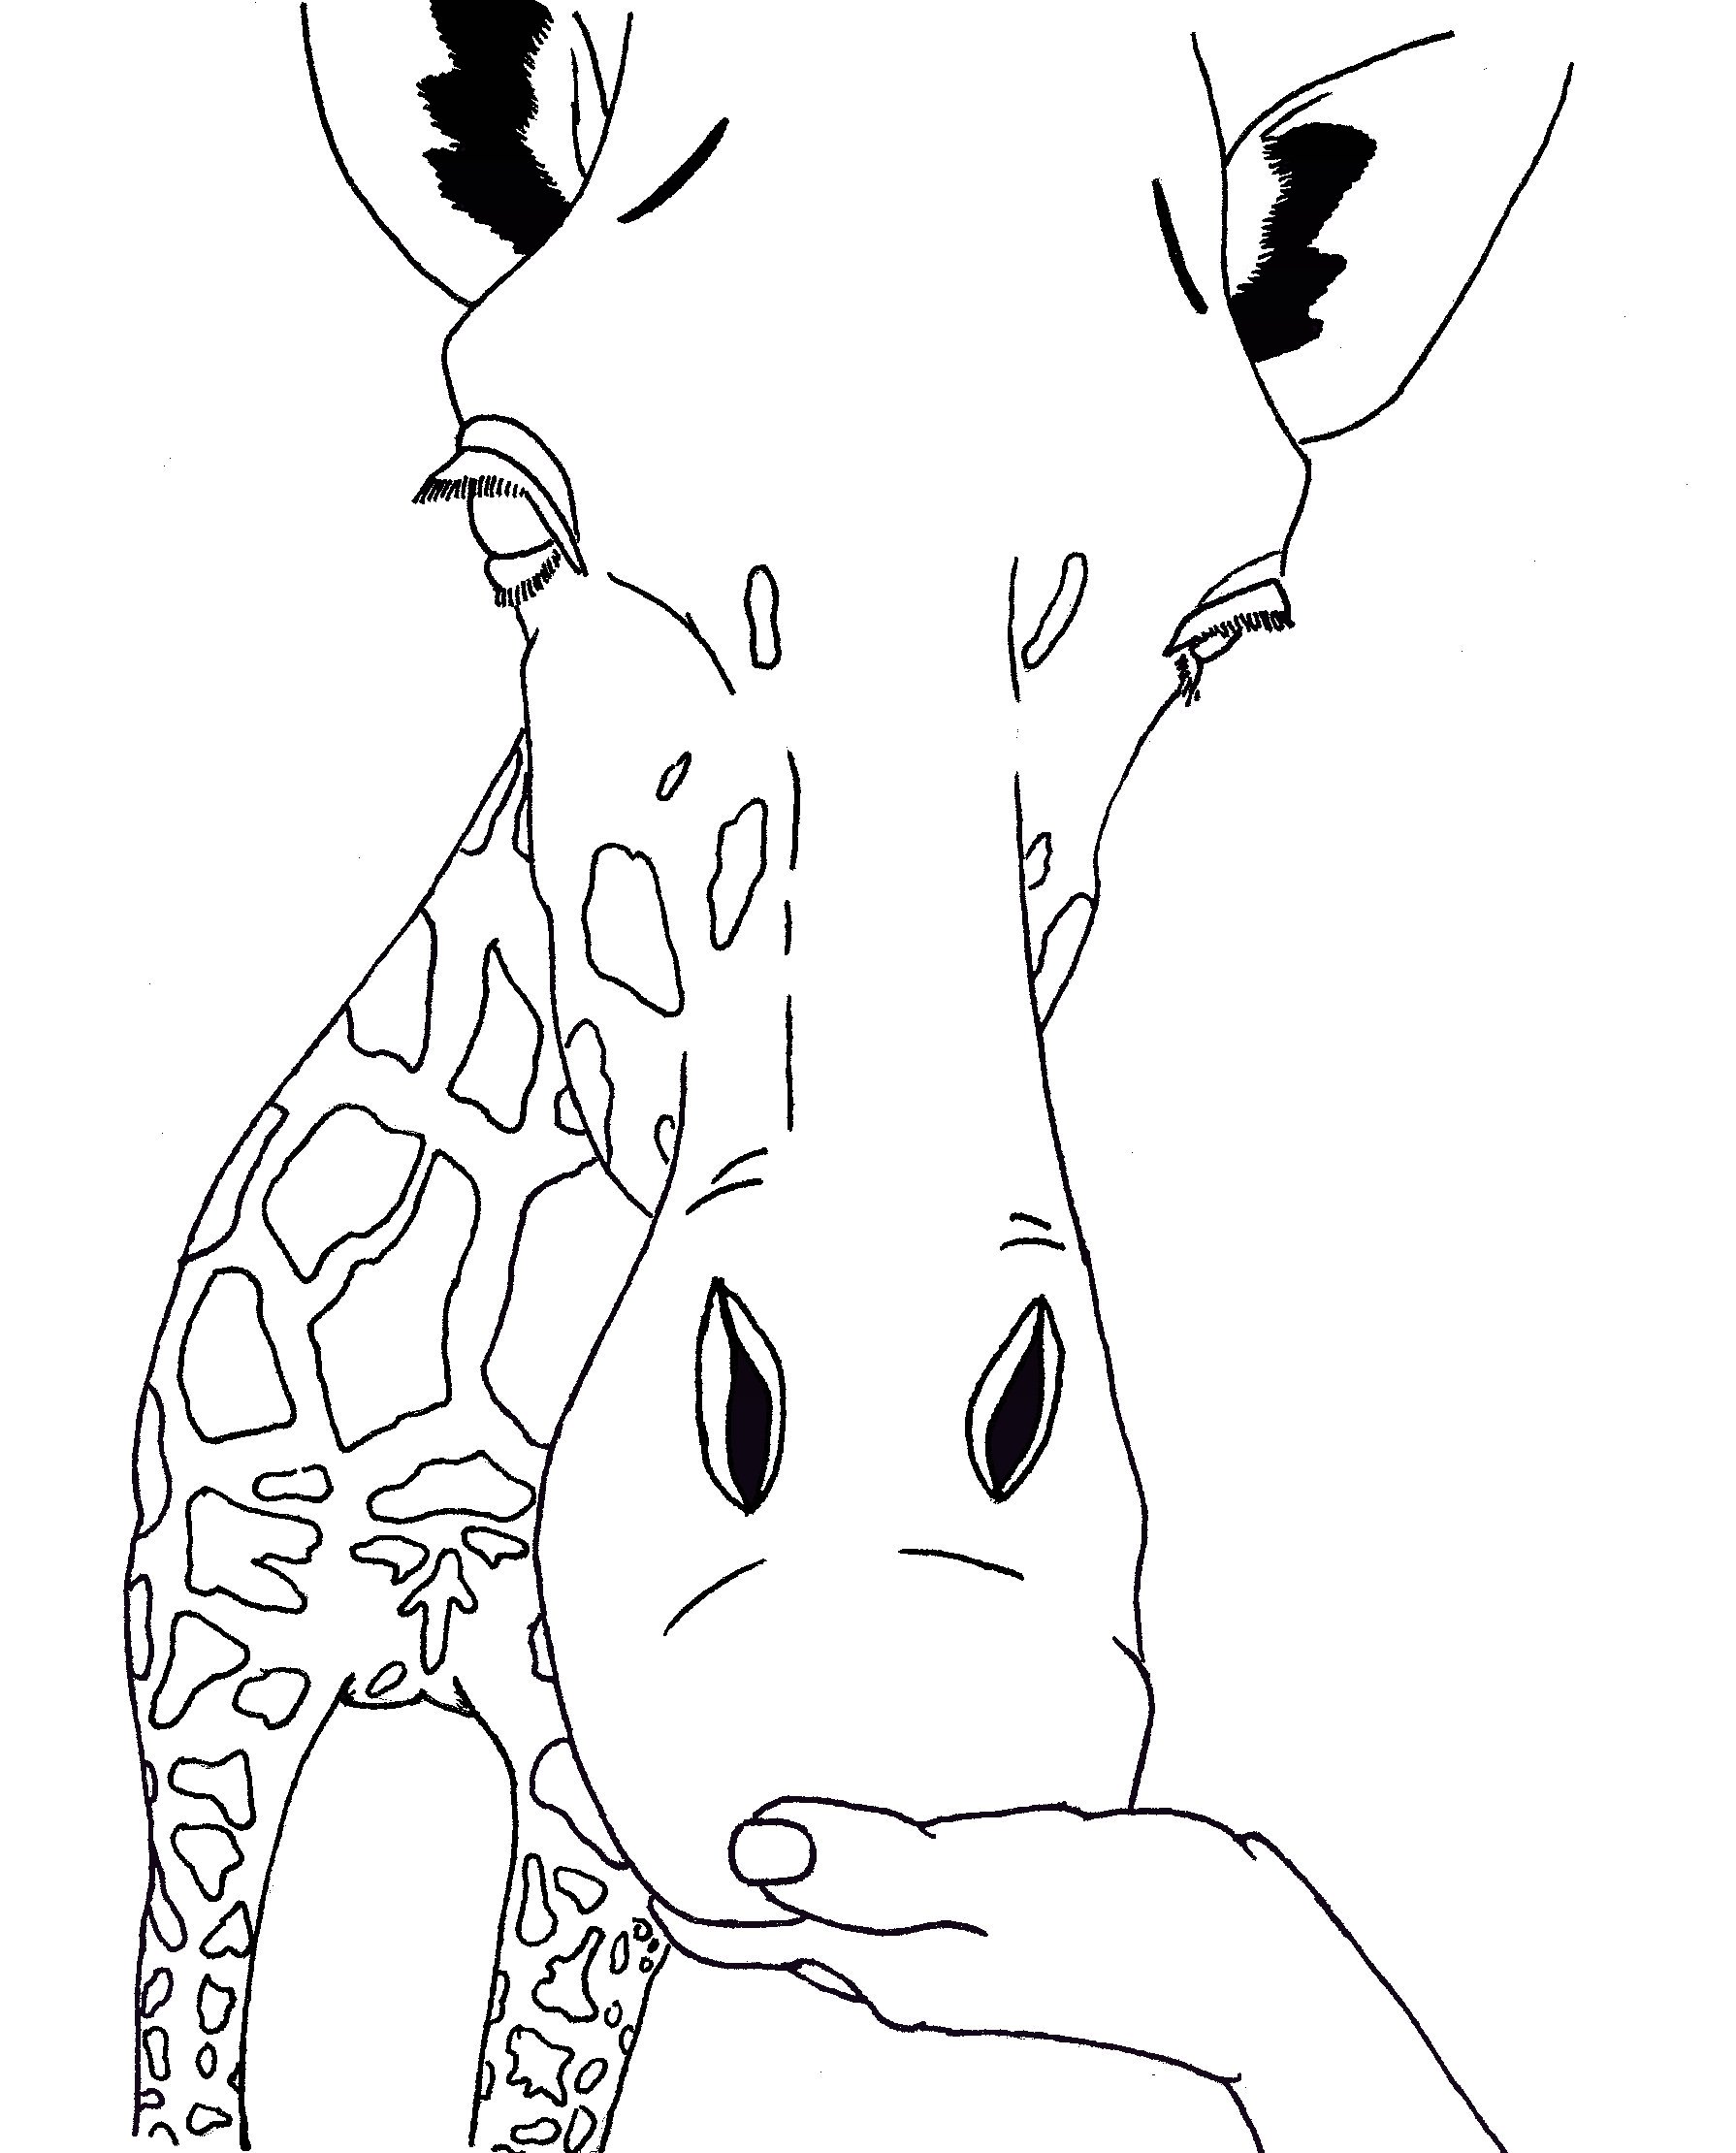 Coloring Page of Giraffe Face